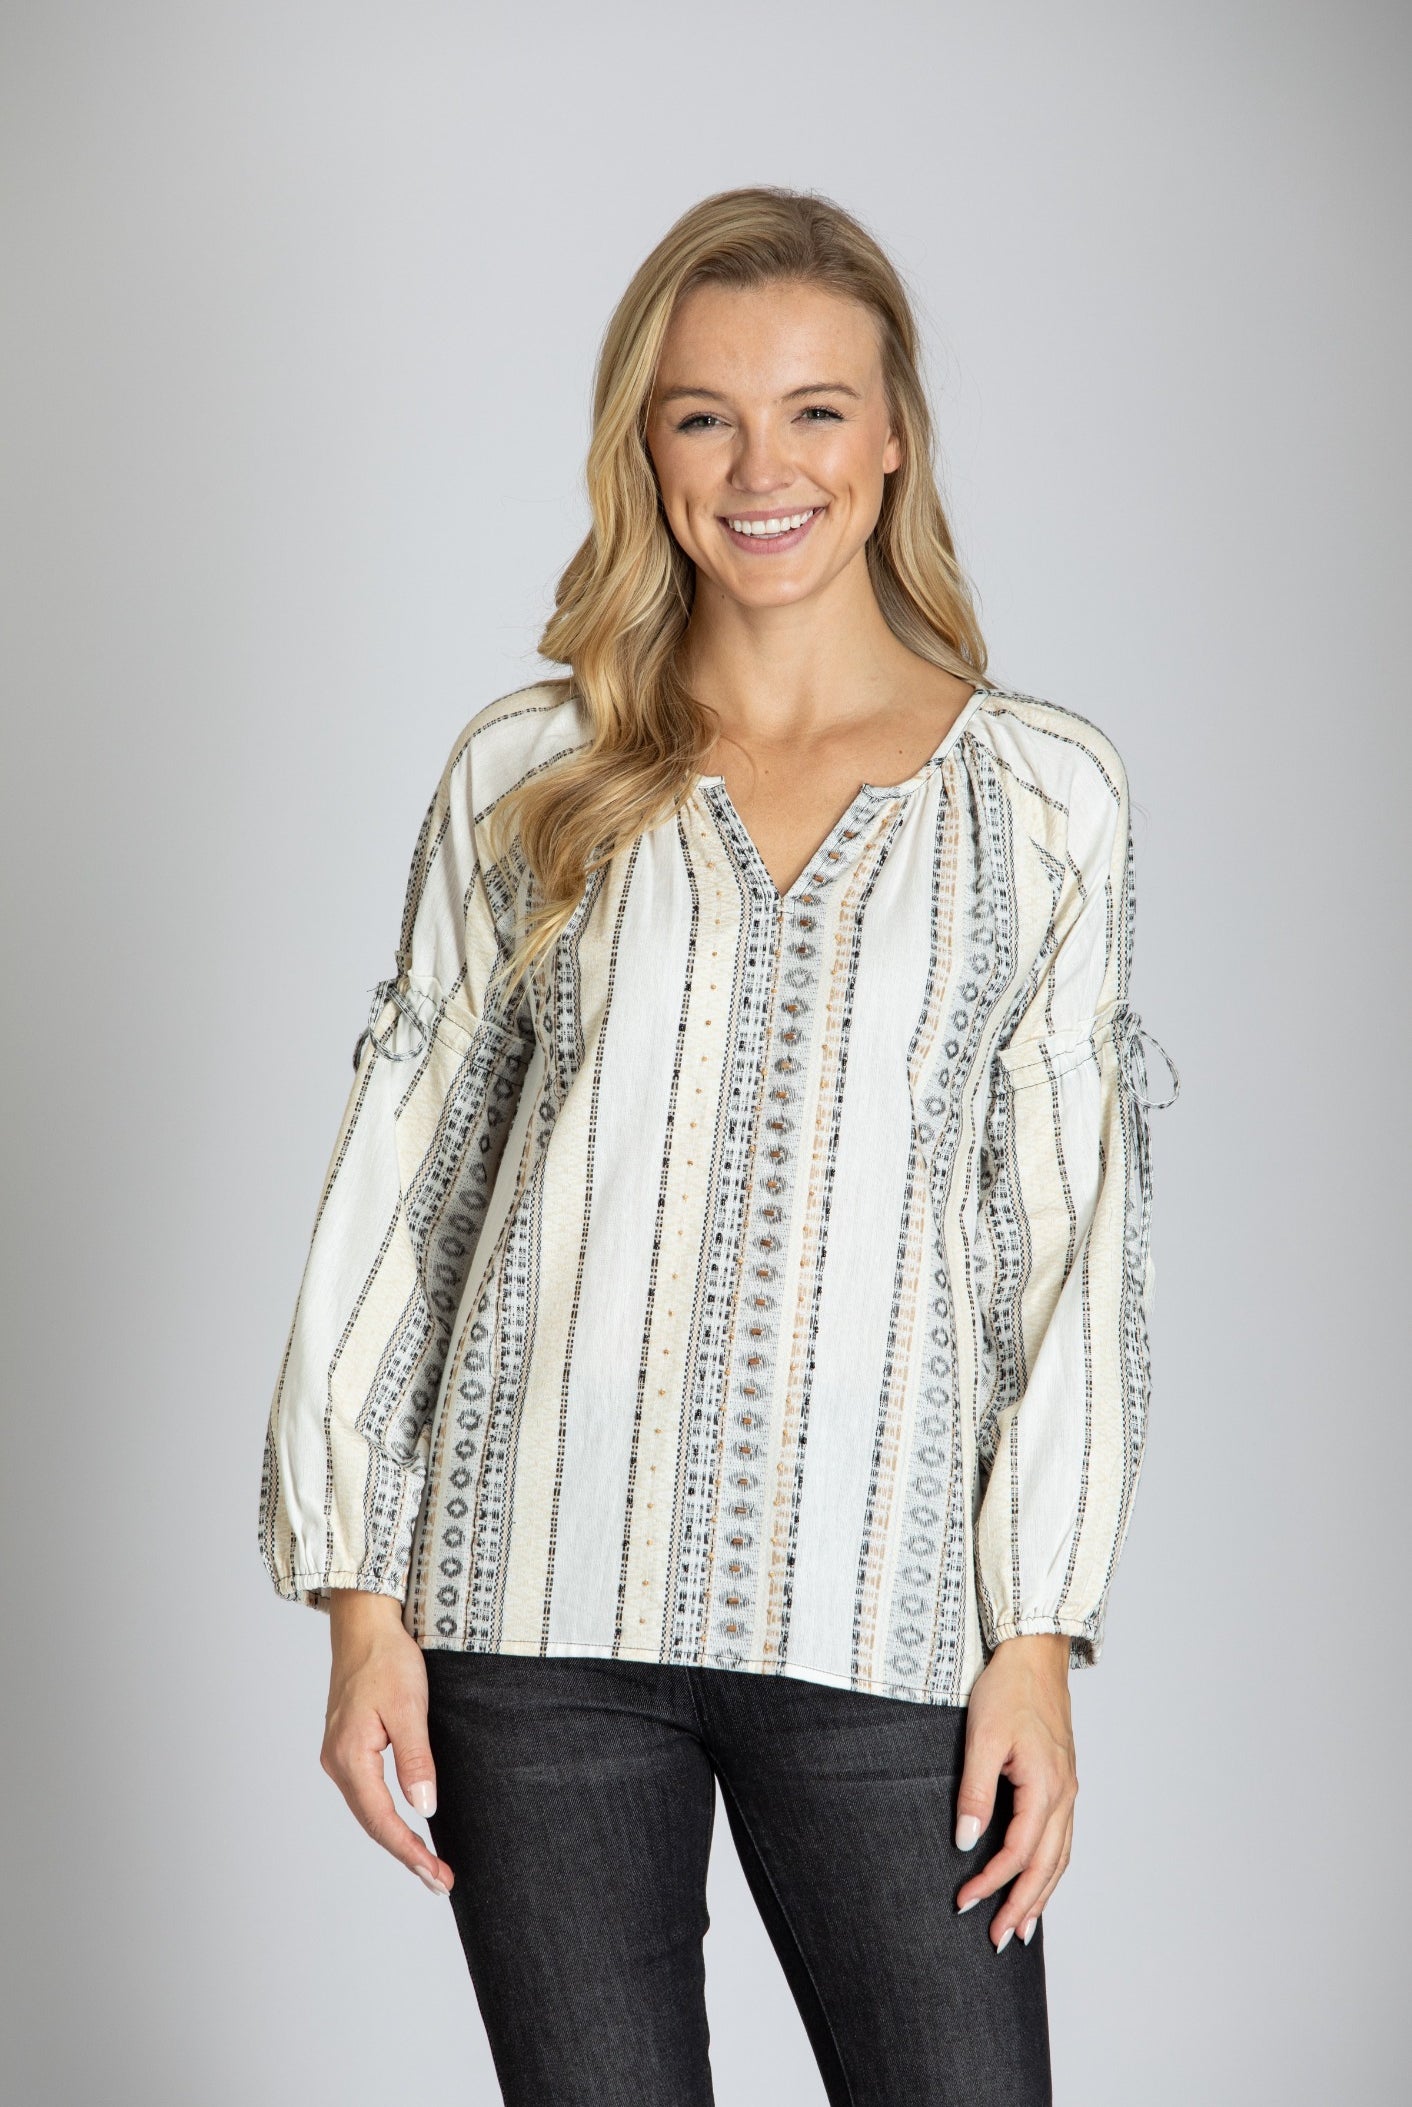 Woodbead panel front Jacquard Top With Bishop Sleeves APNY